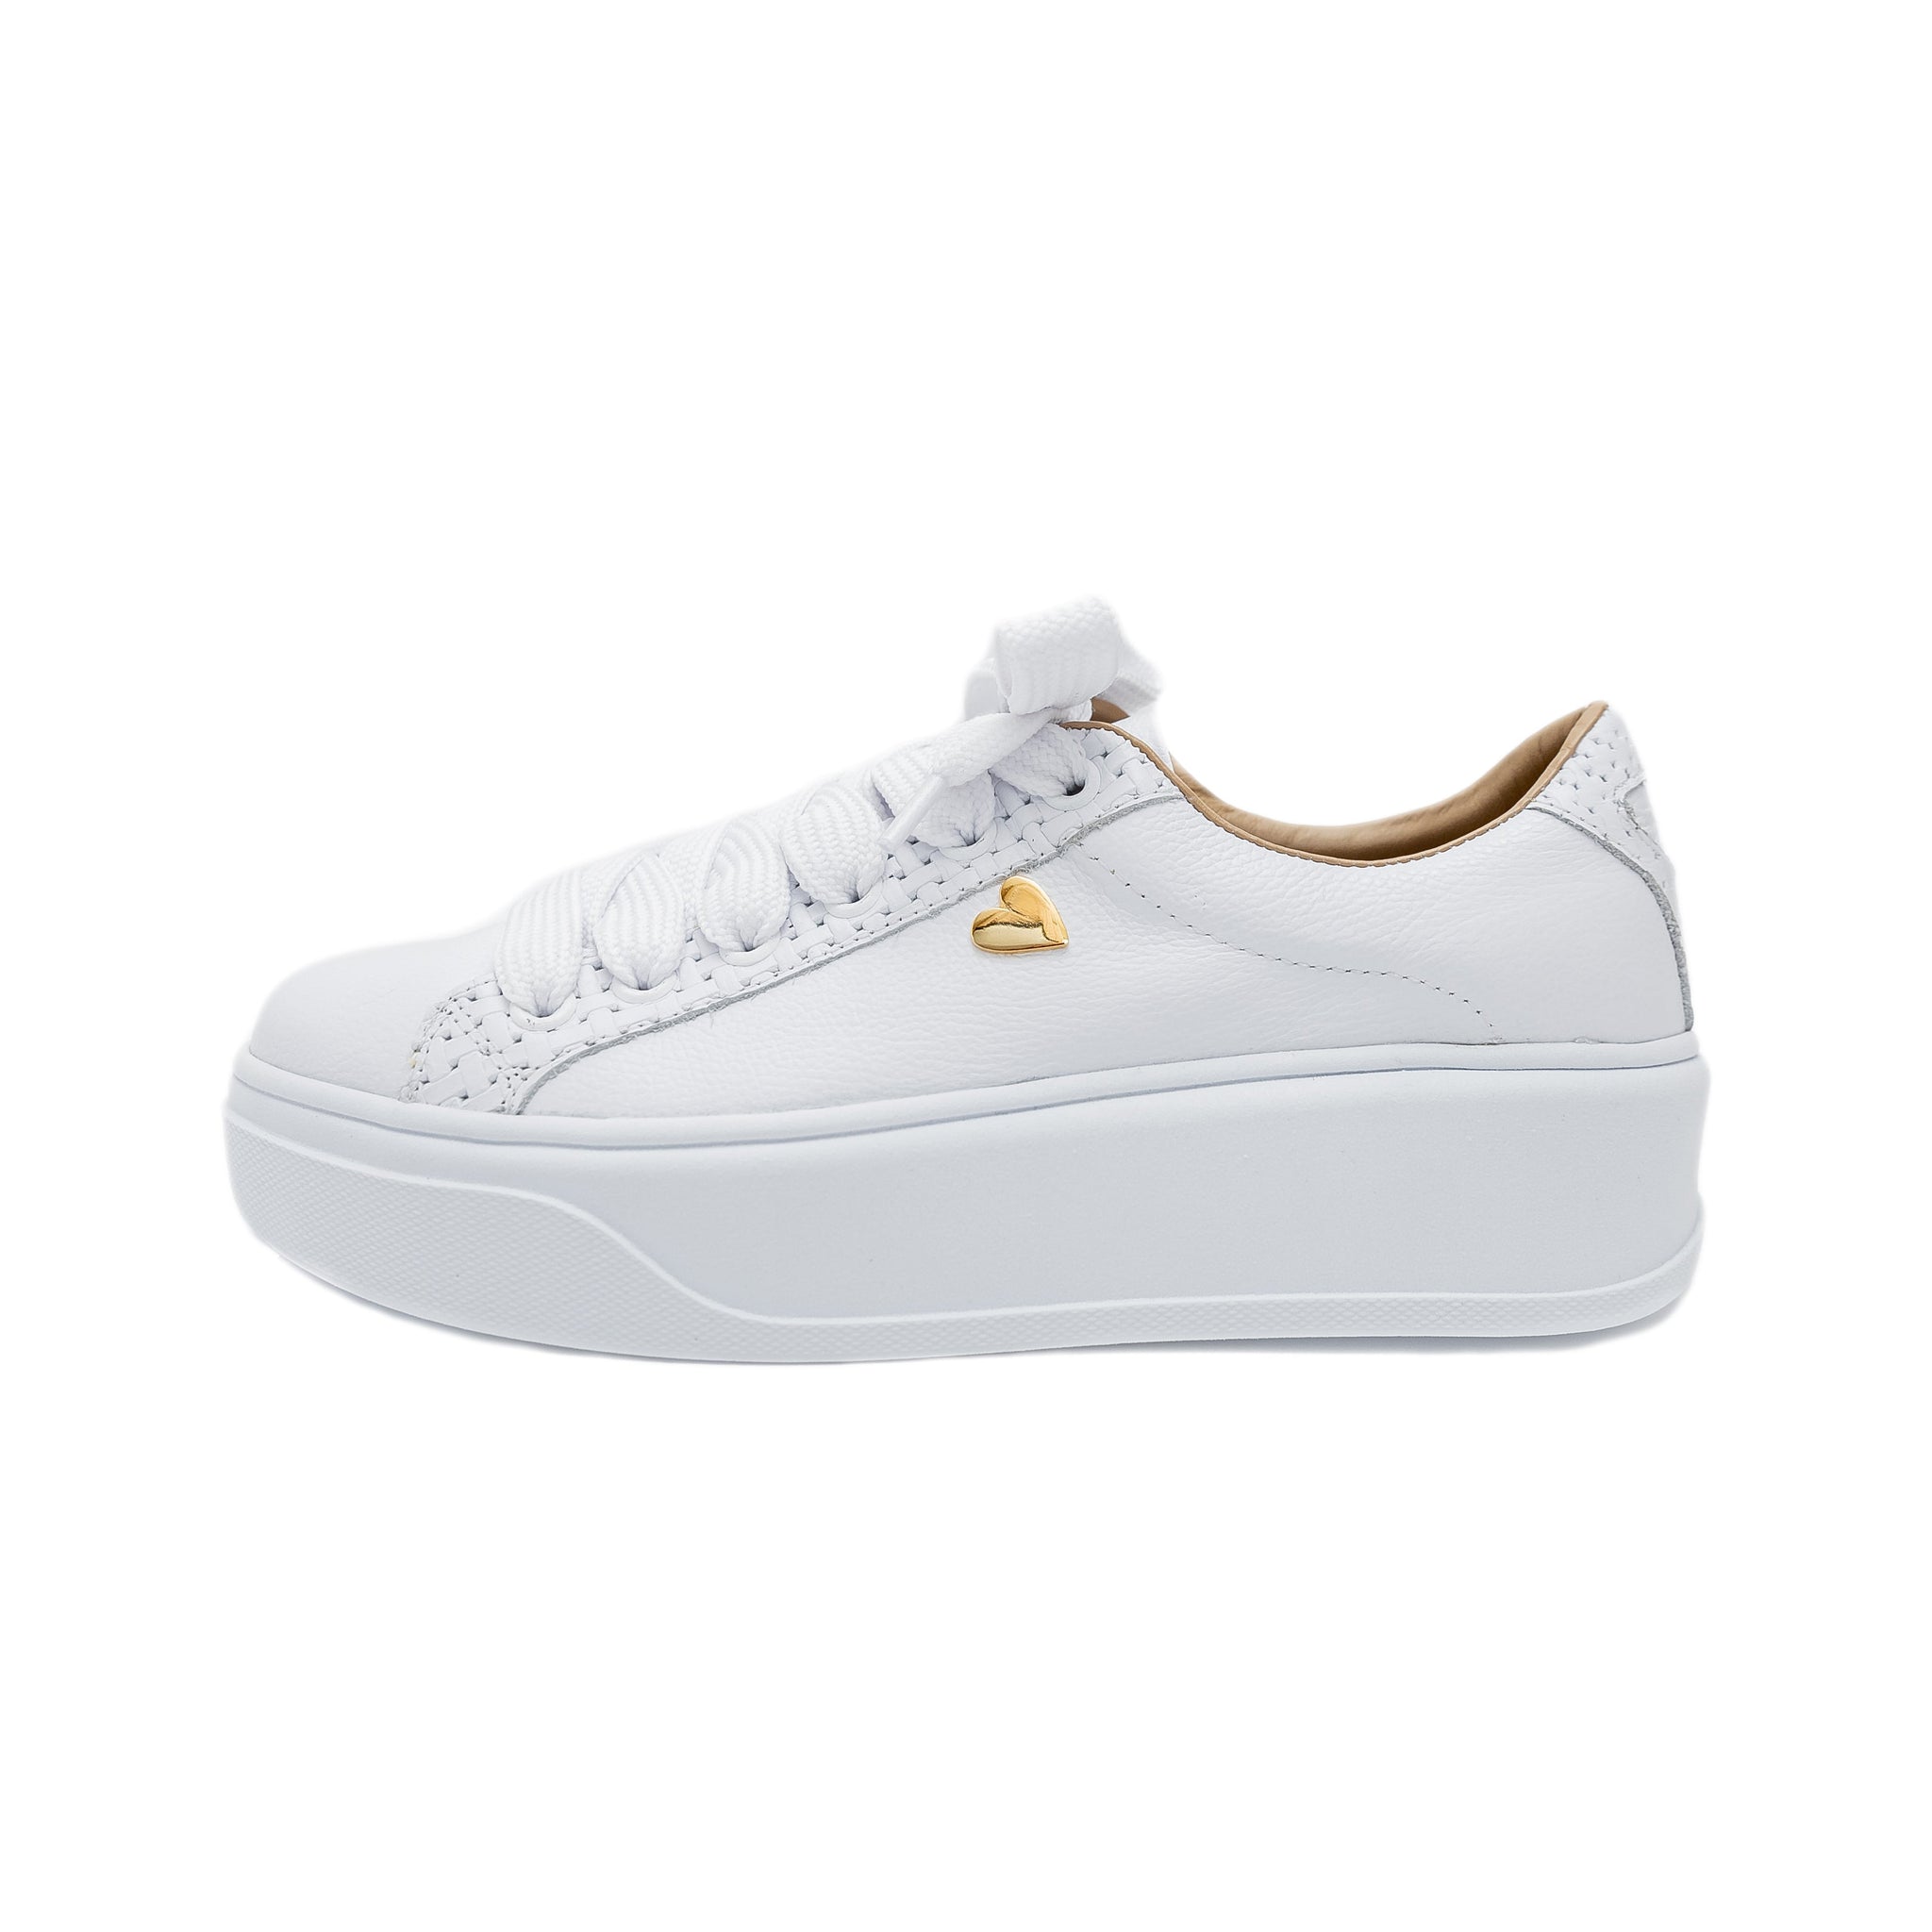 Briana White Sneakers by Nataly Mendez Genuine leather upper material Genuine leather insole lining Rubber platform lining American sizes Flexible rubber outsole Hand made 1.5 inch heel height 1 inch platform